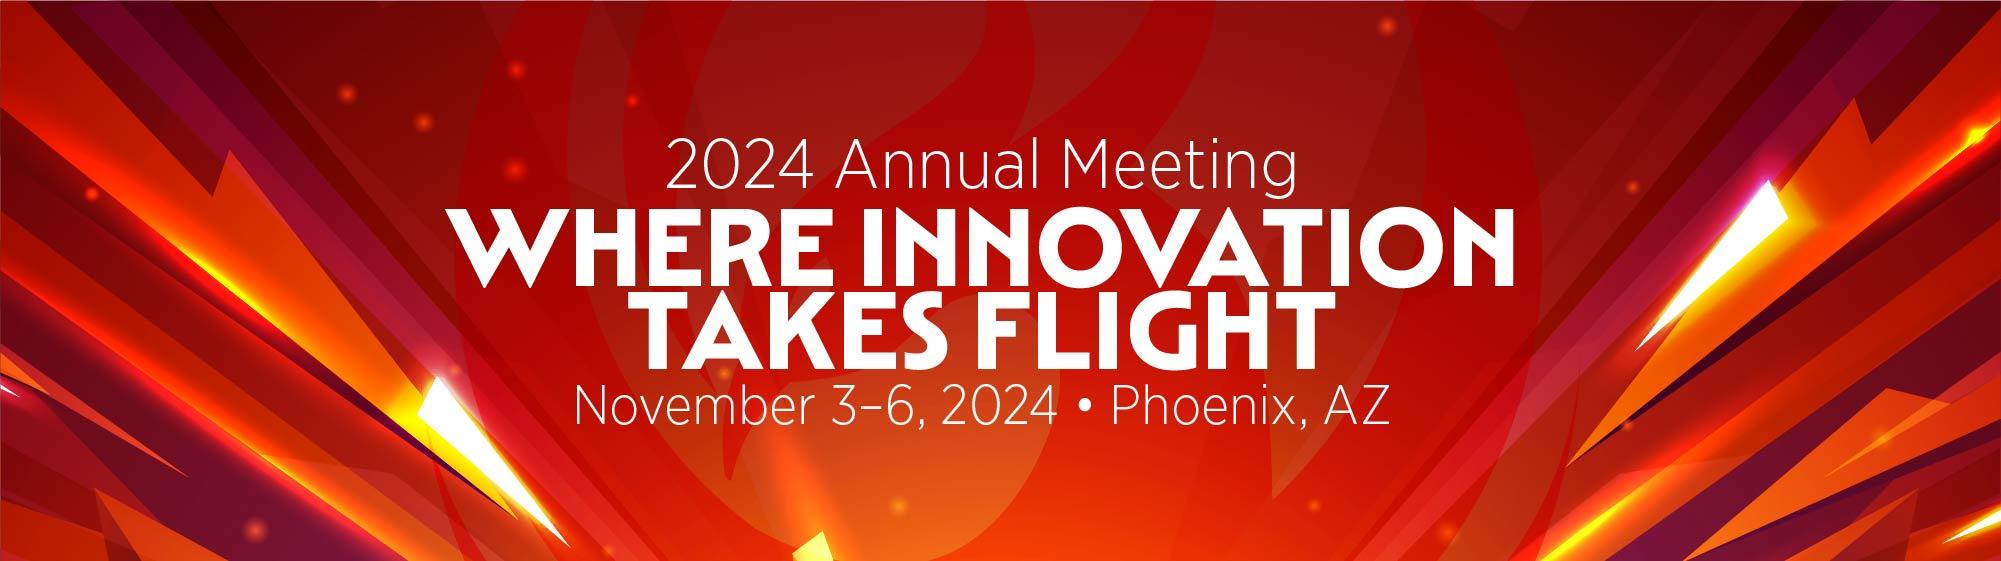 2024 Annual Meeting banner - Where Innovation Takes Flight